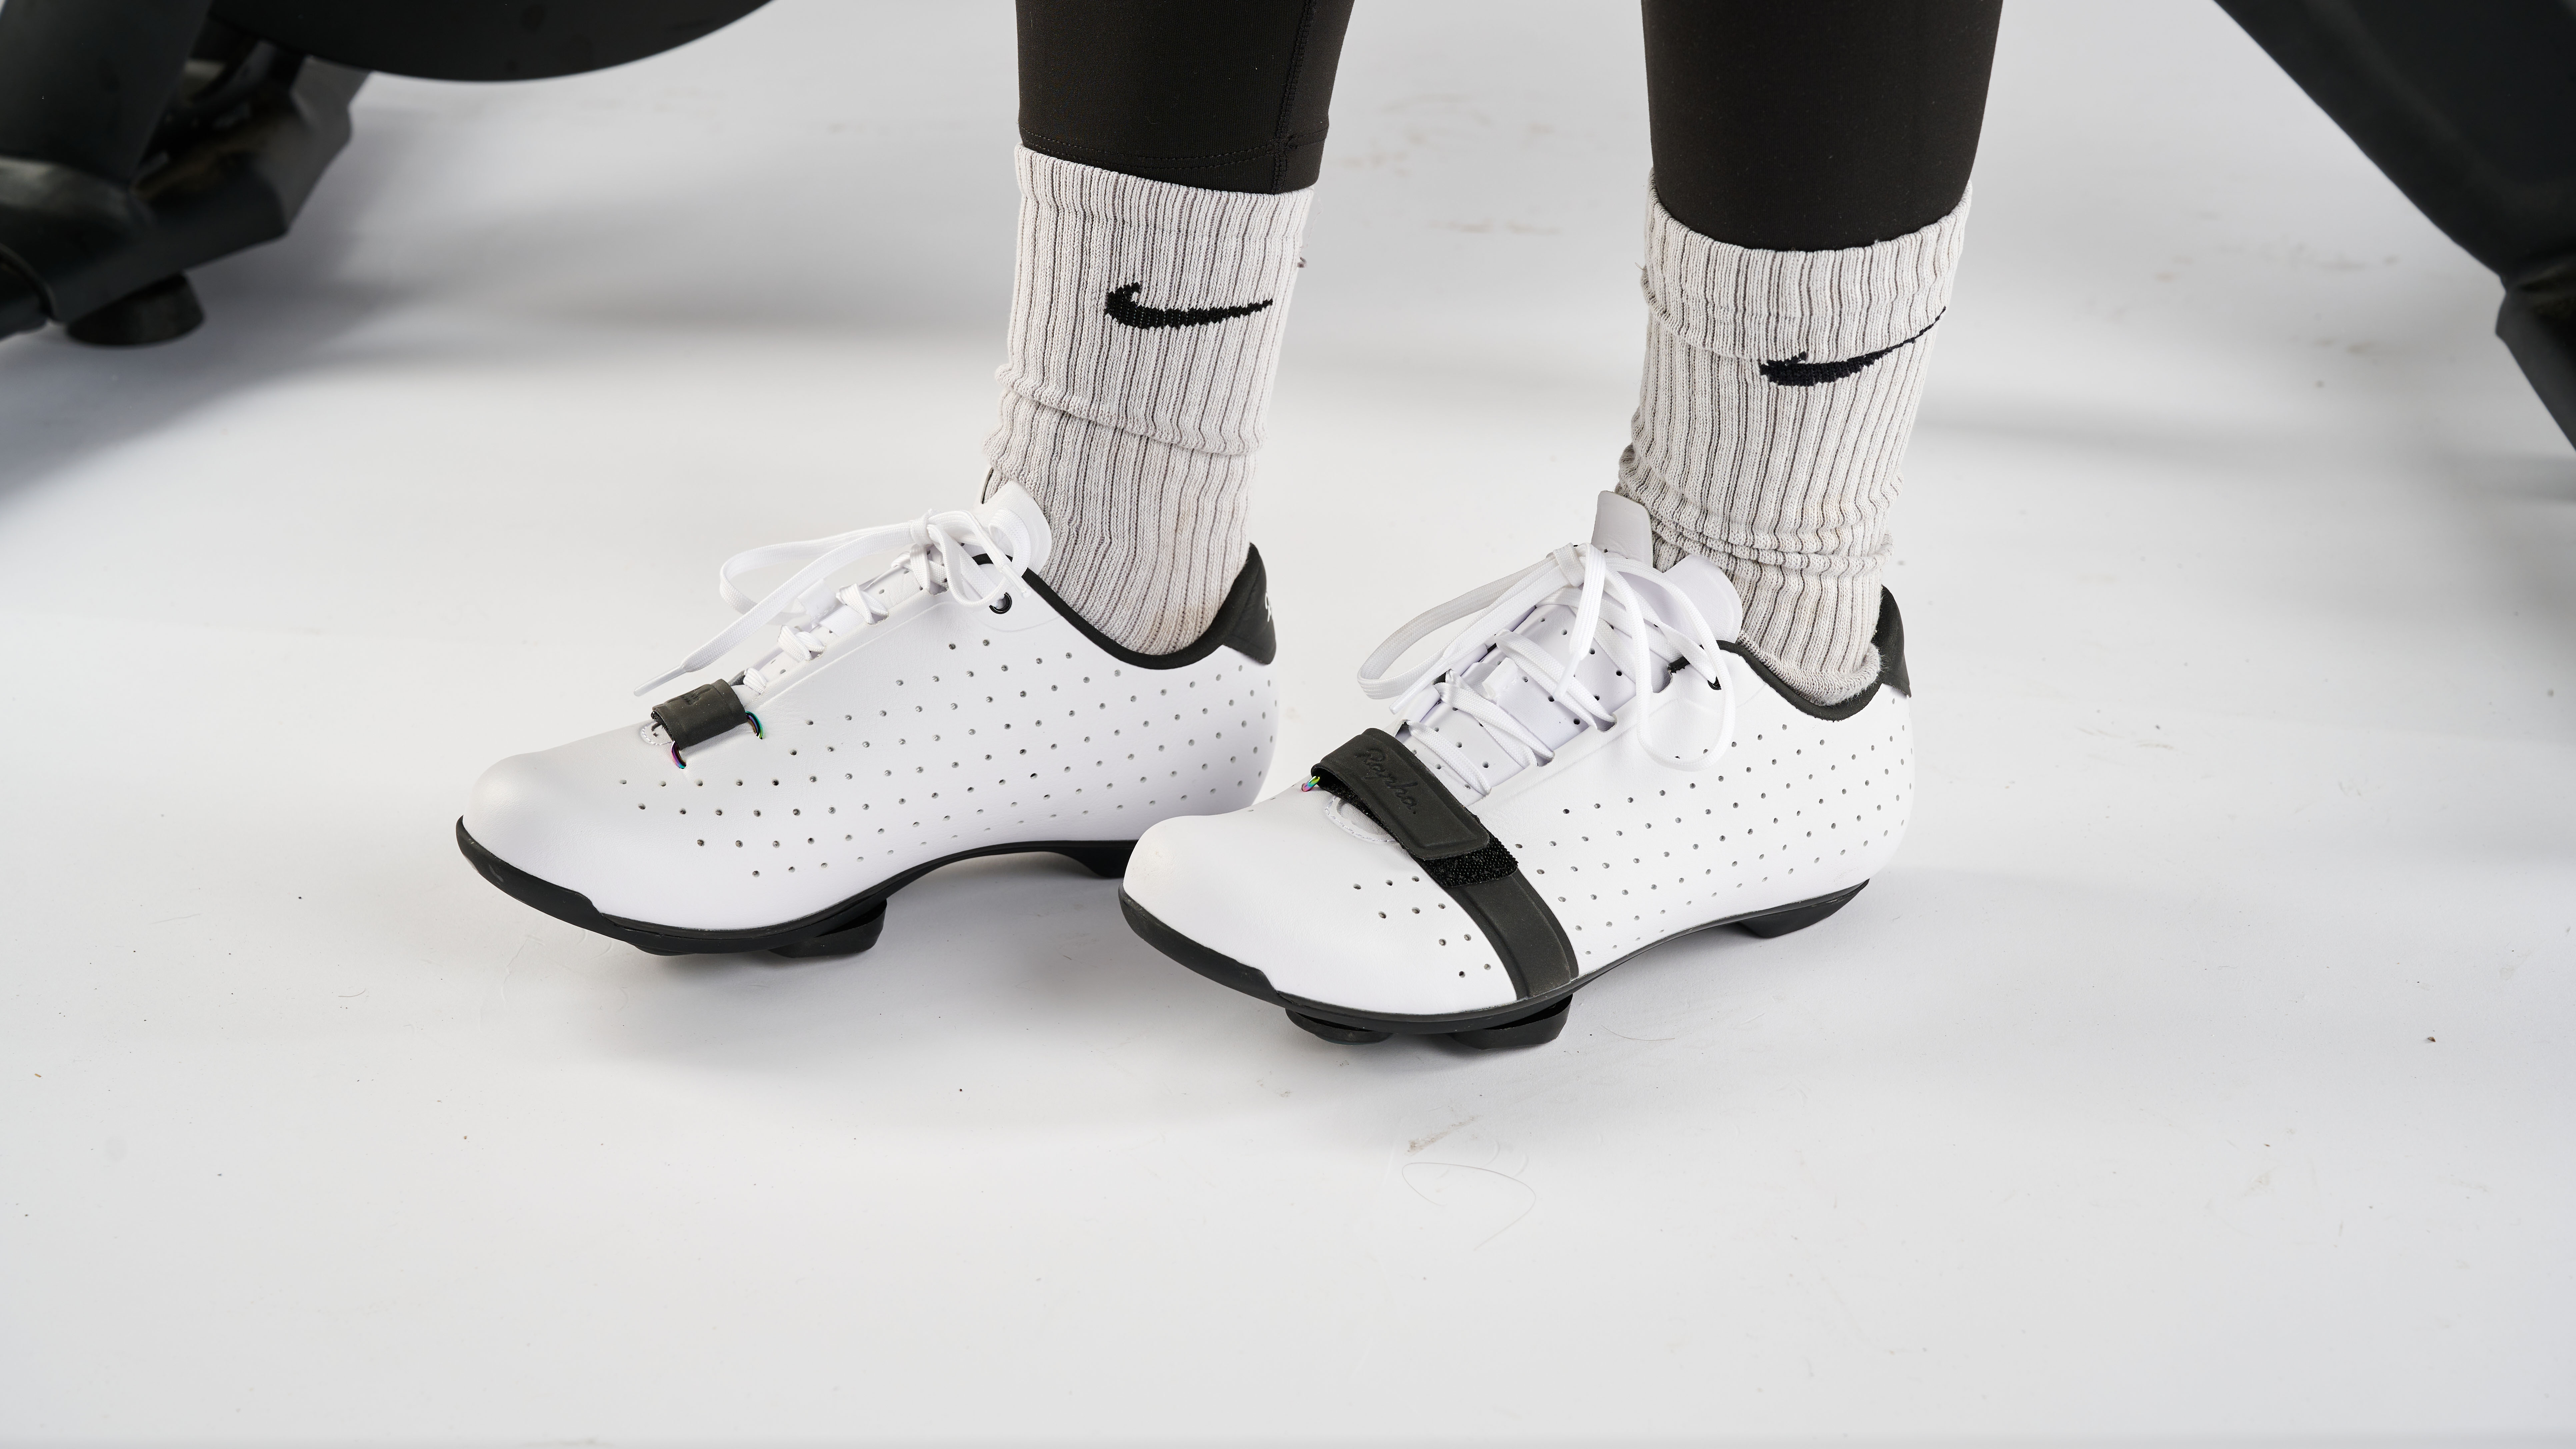 Rapha classic cycling shoes